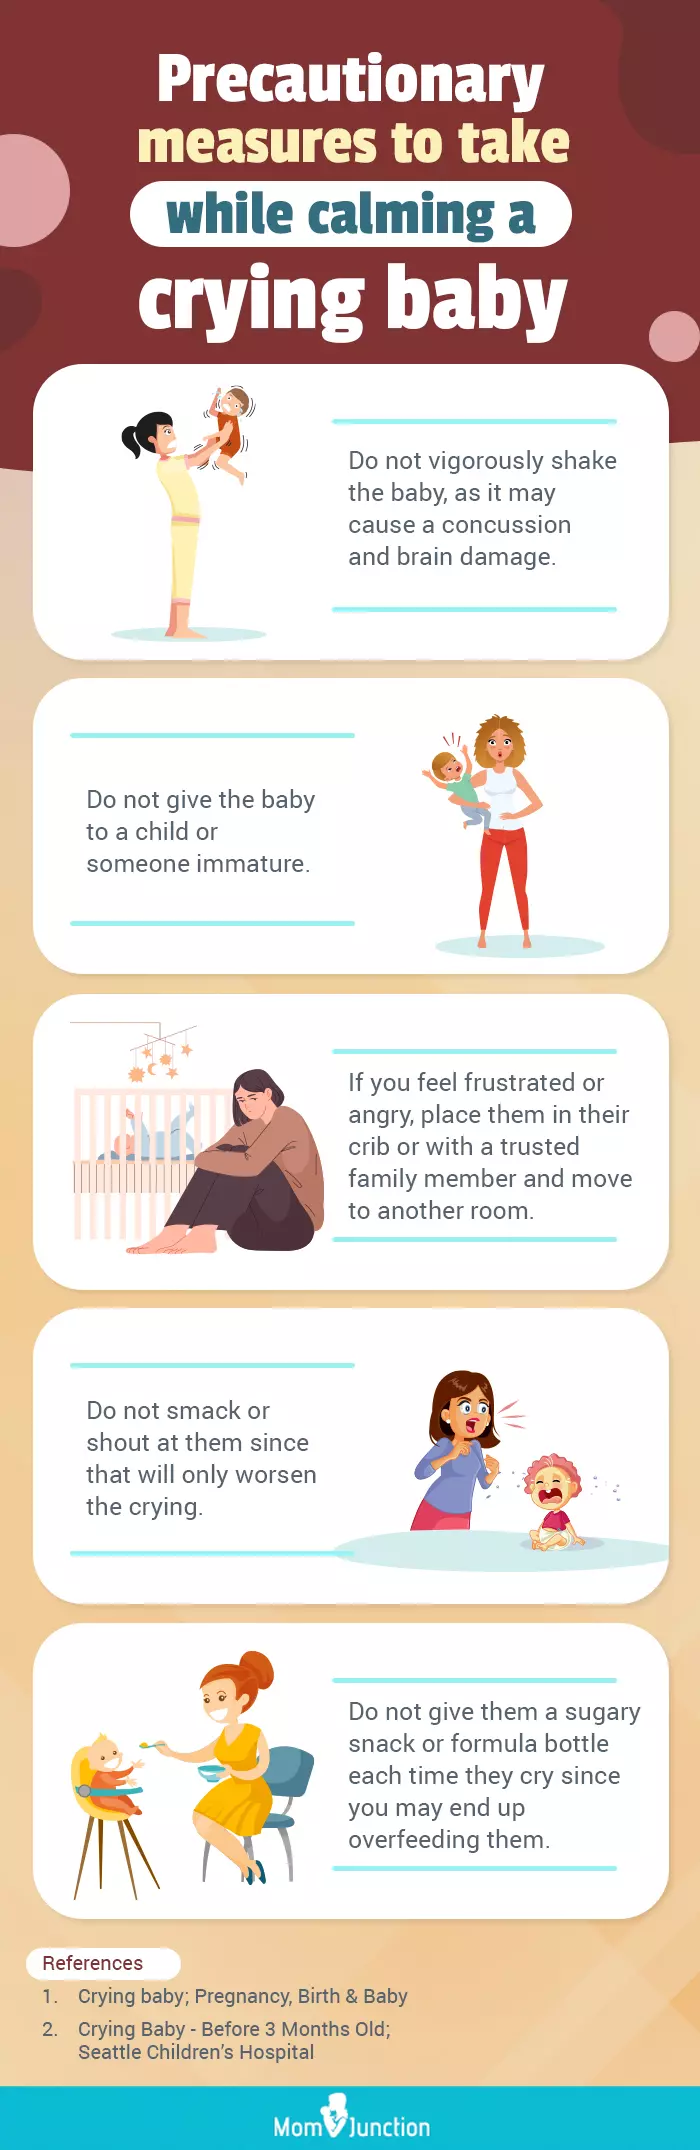 precautionary measures for when calming a crying baby (infographic)